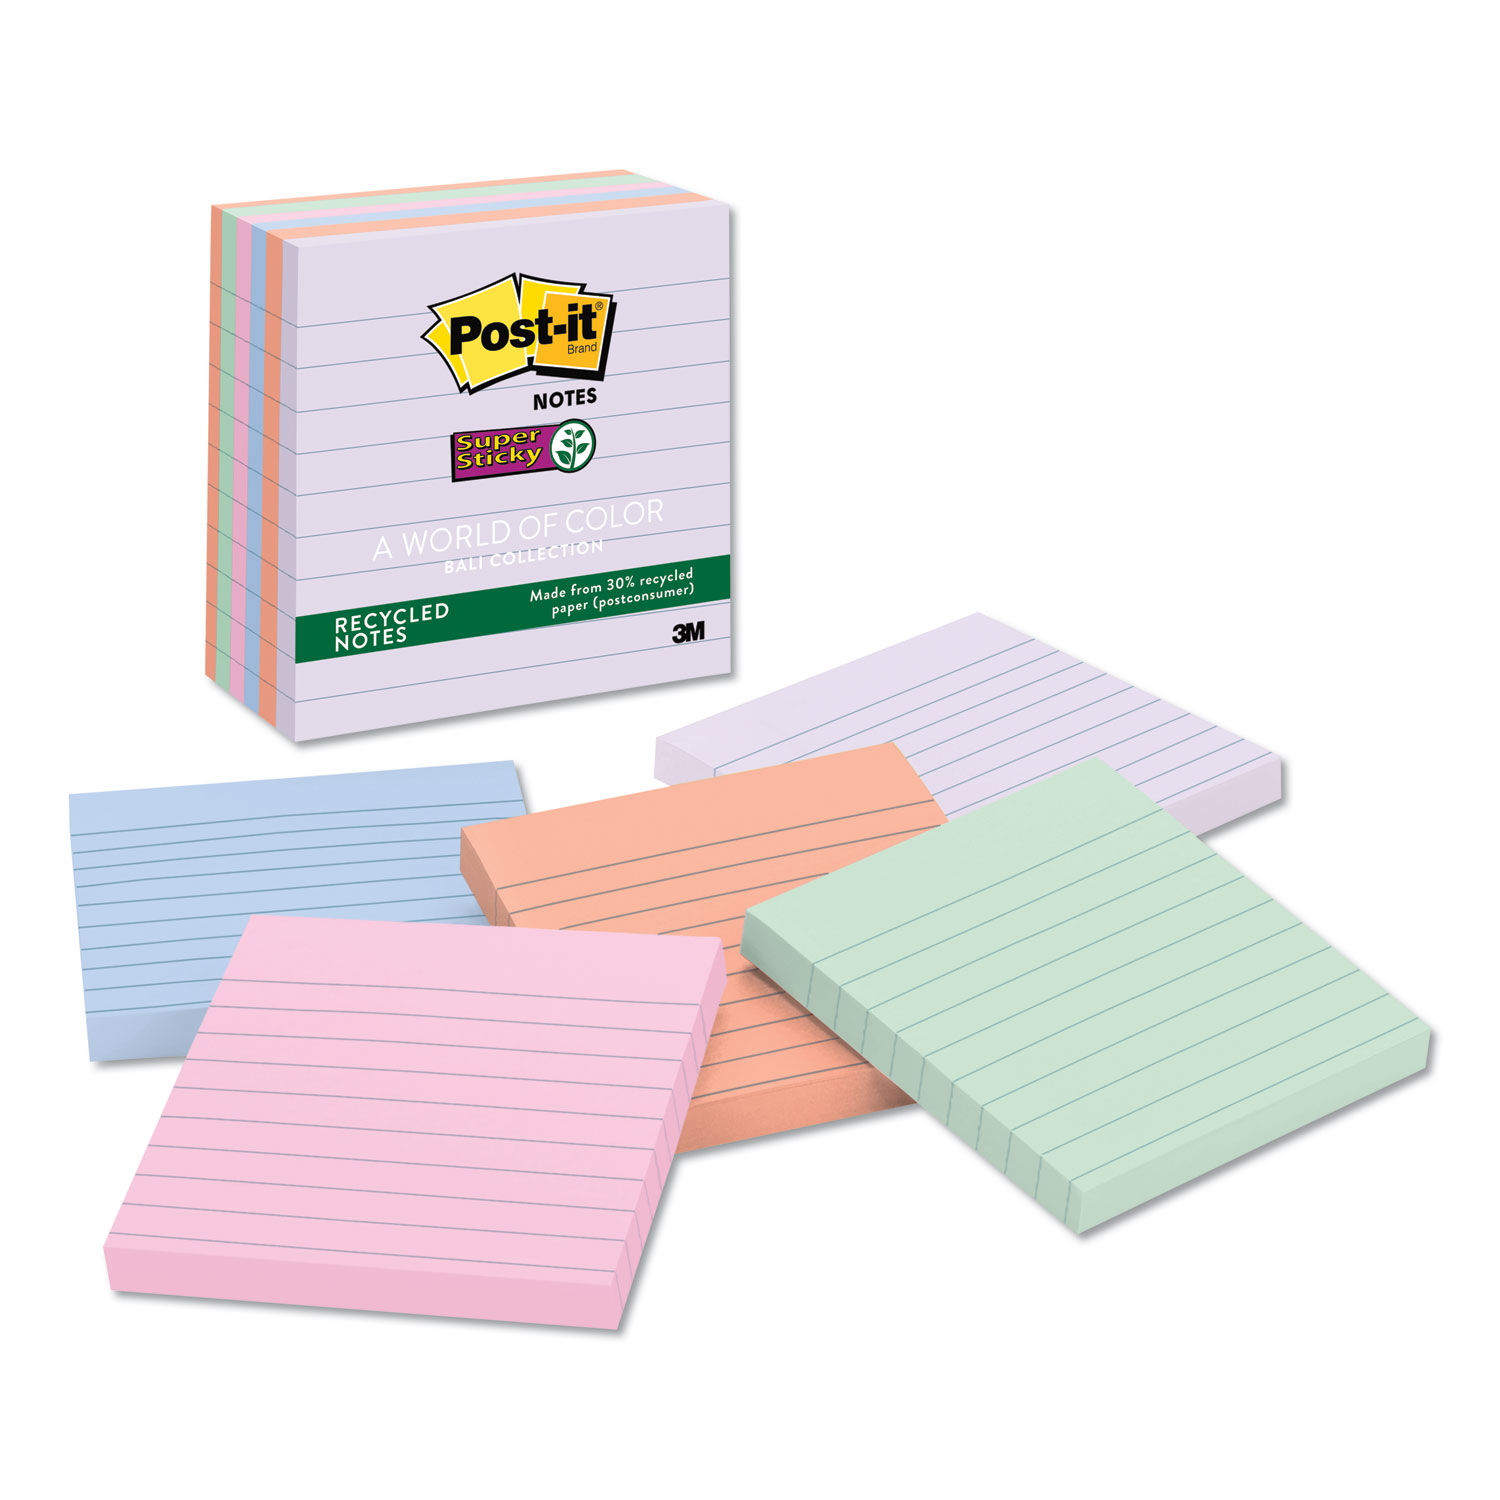  Post-it Notes Super Sticky 675-6SSNRP Recycled Notes in Bali Colors, Lined, 4 x 4, 90-Sheet, 6/Pack (MMM6756SSNRP) 